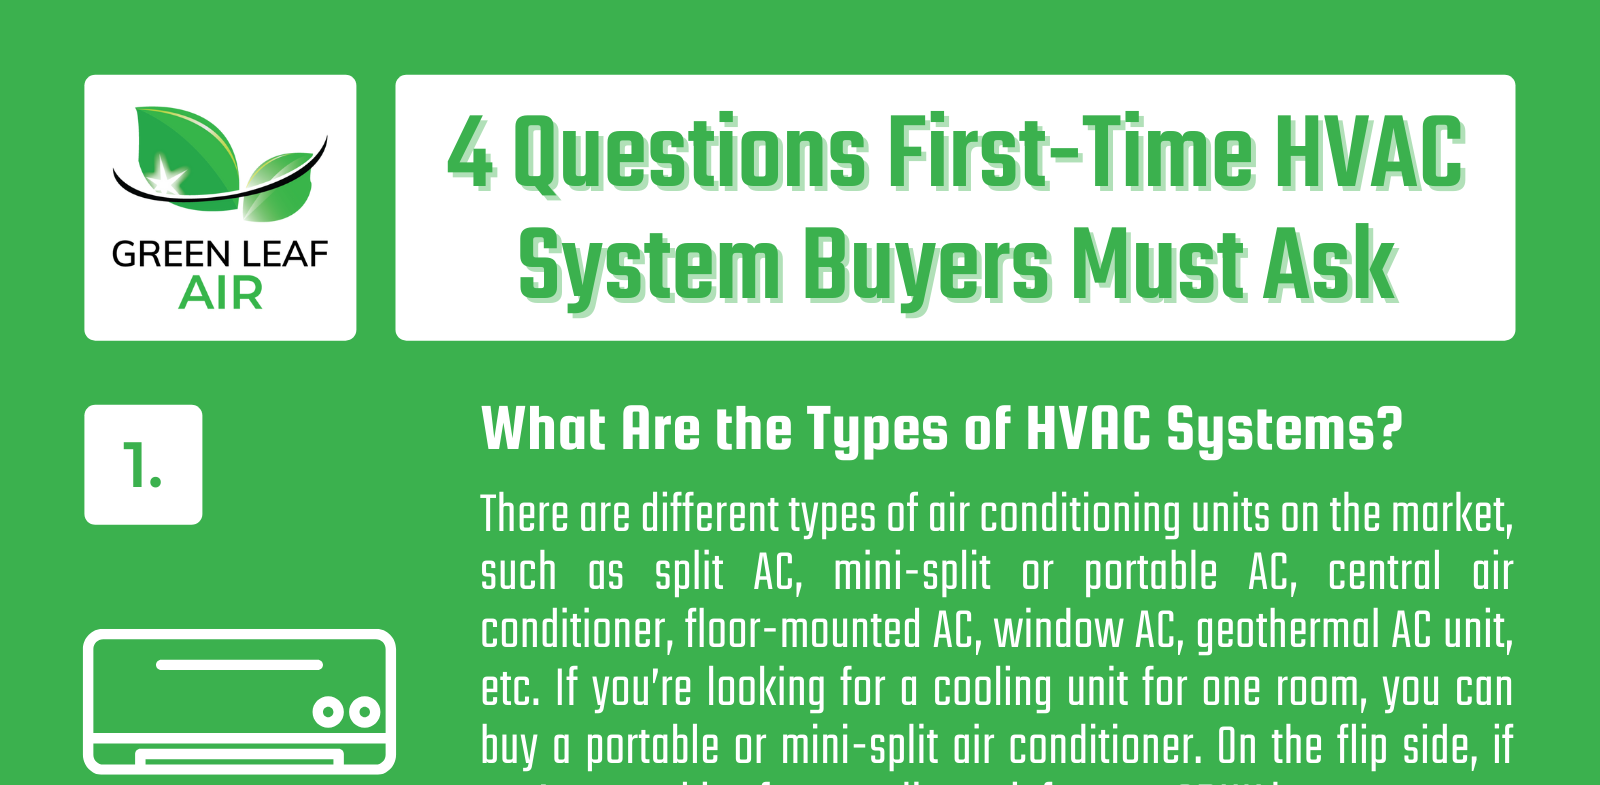 4 Questions First-Time HVAC System Buyers Must Ask